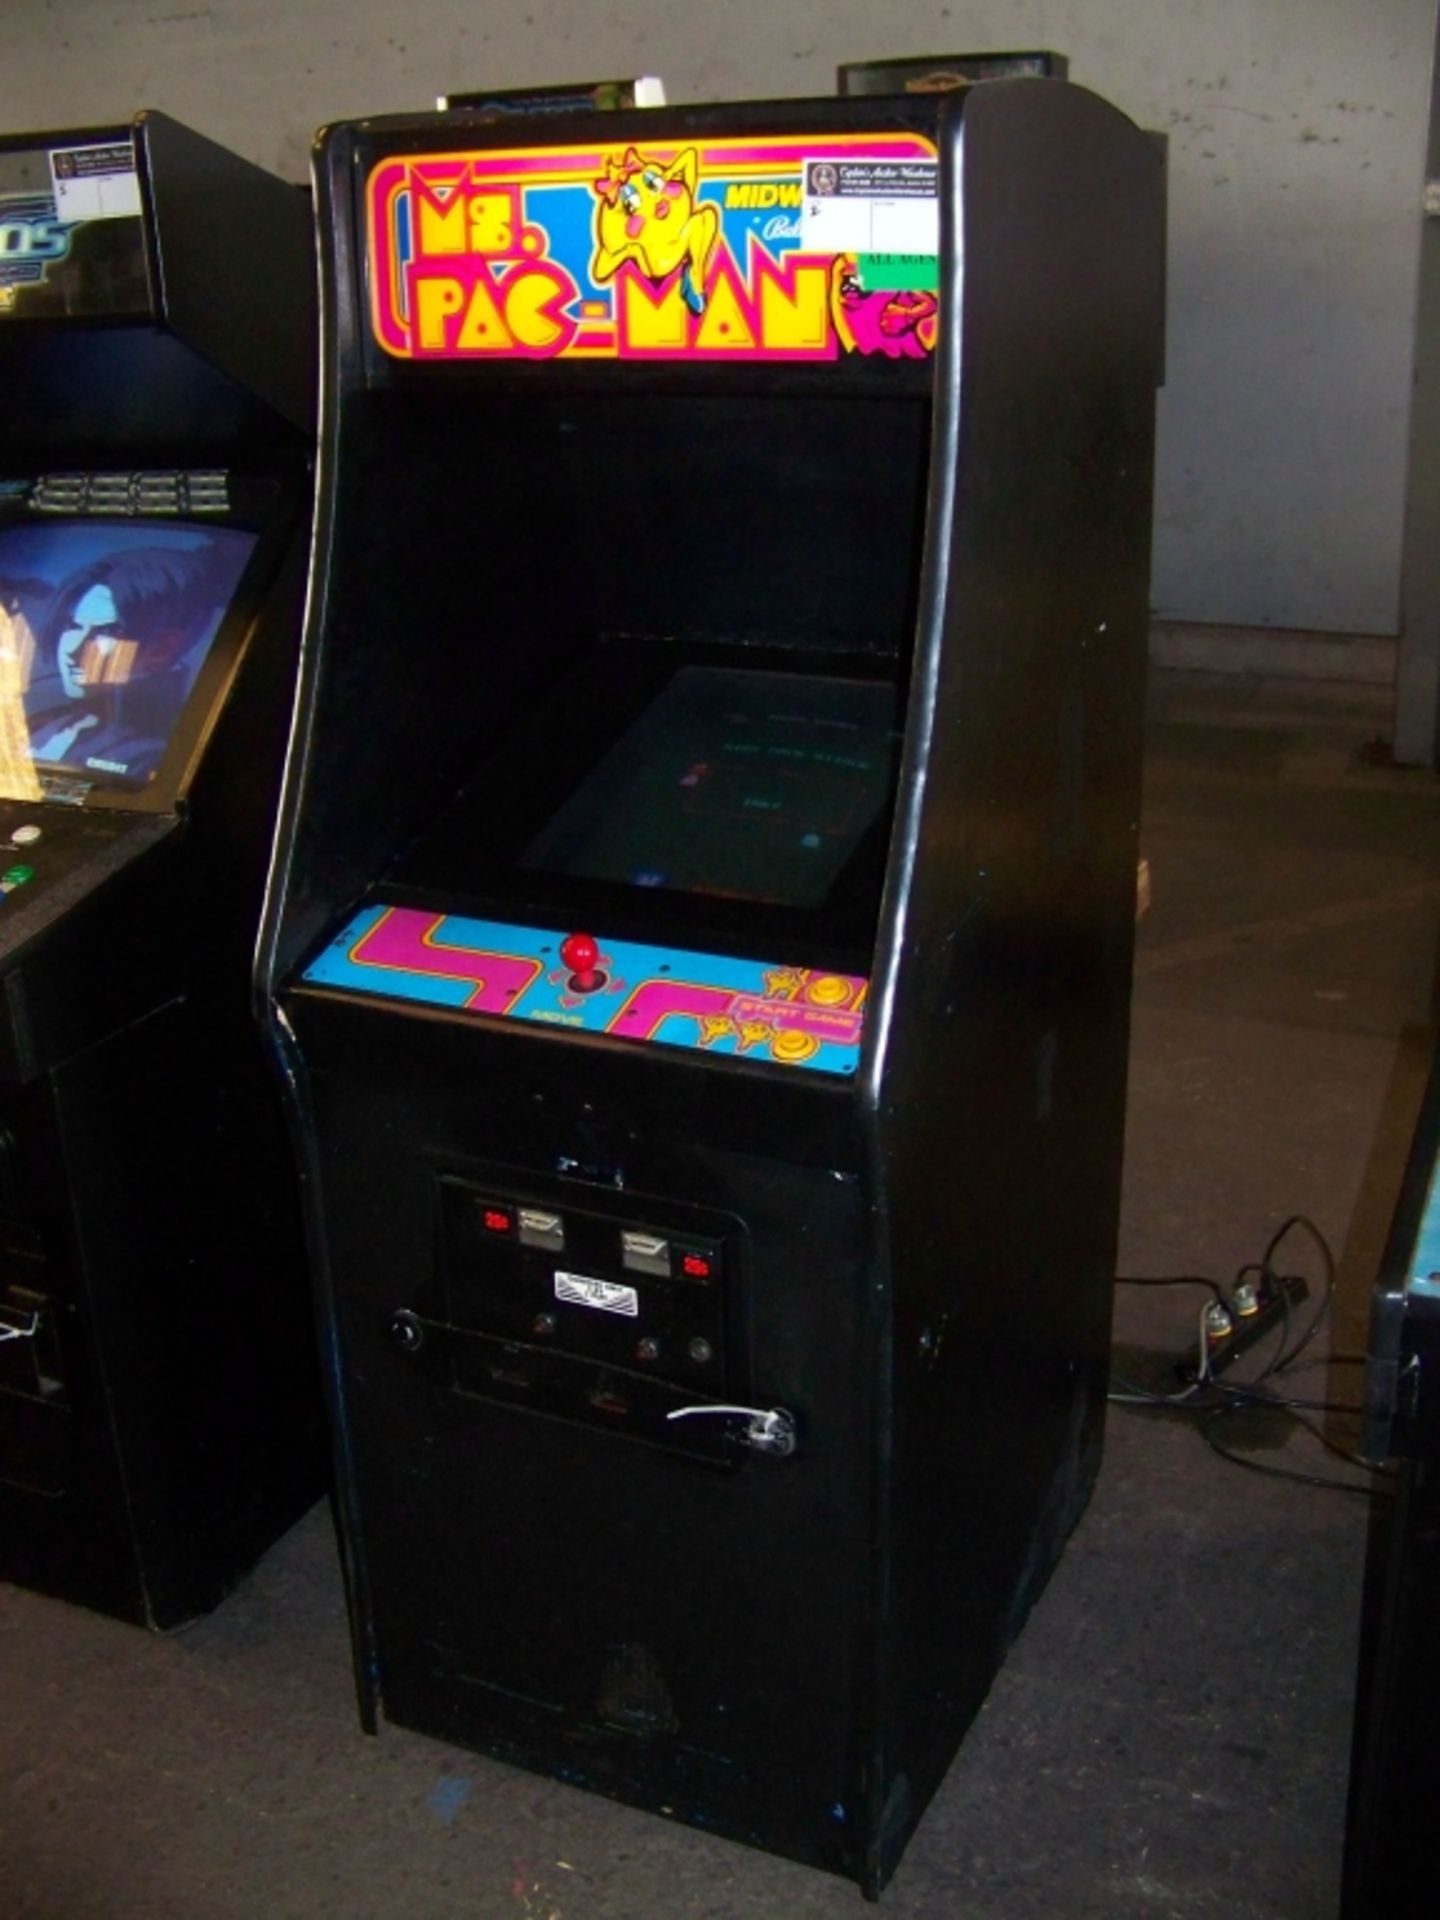 MS PACMAN CLASSIC UPRIGHT ARCADE GAME - Image 2 of 5